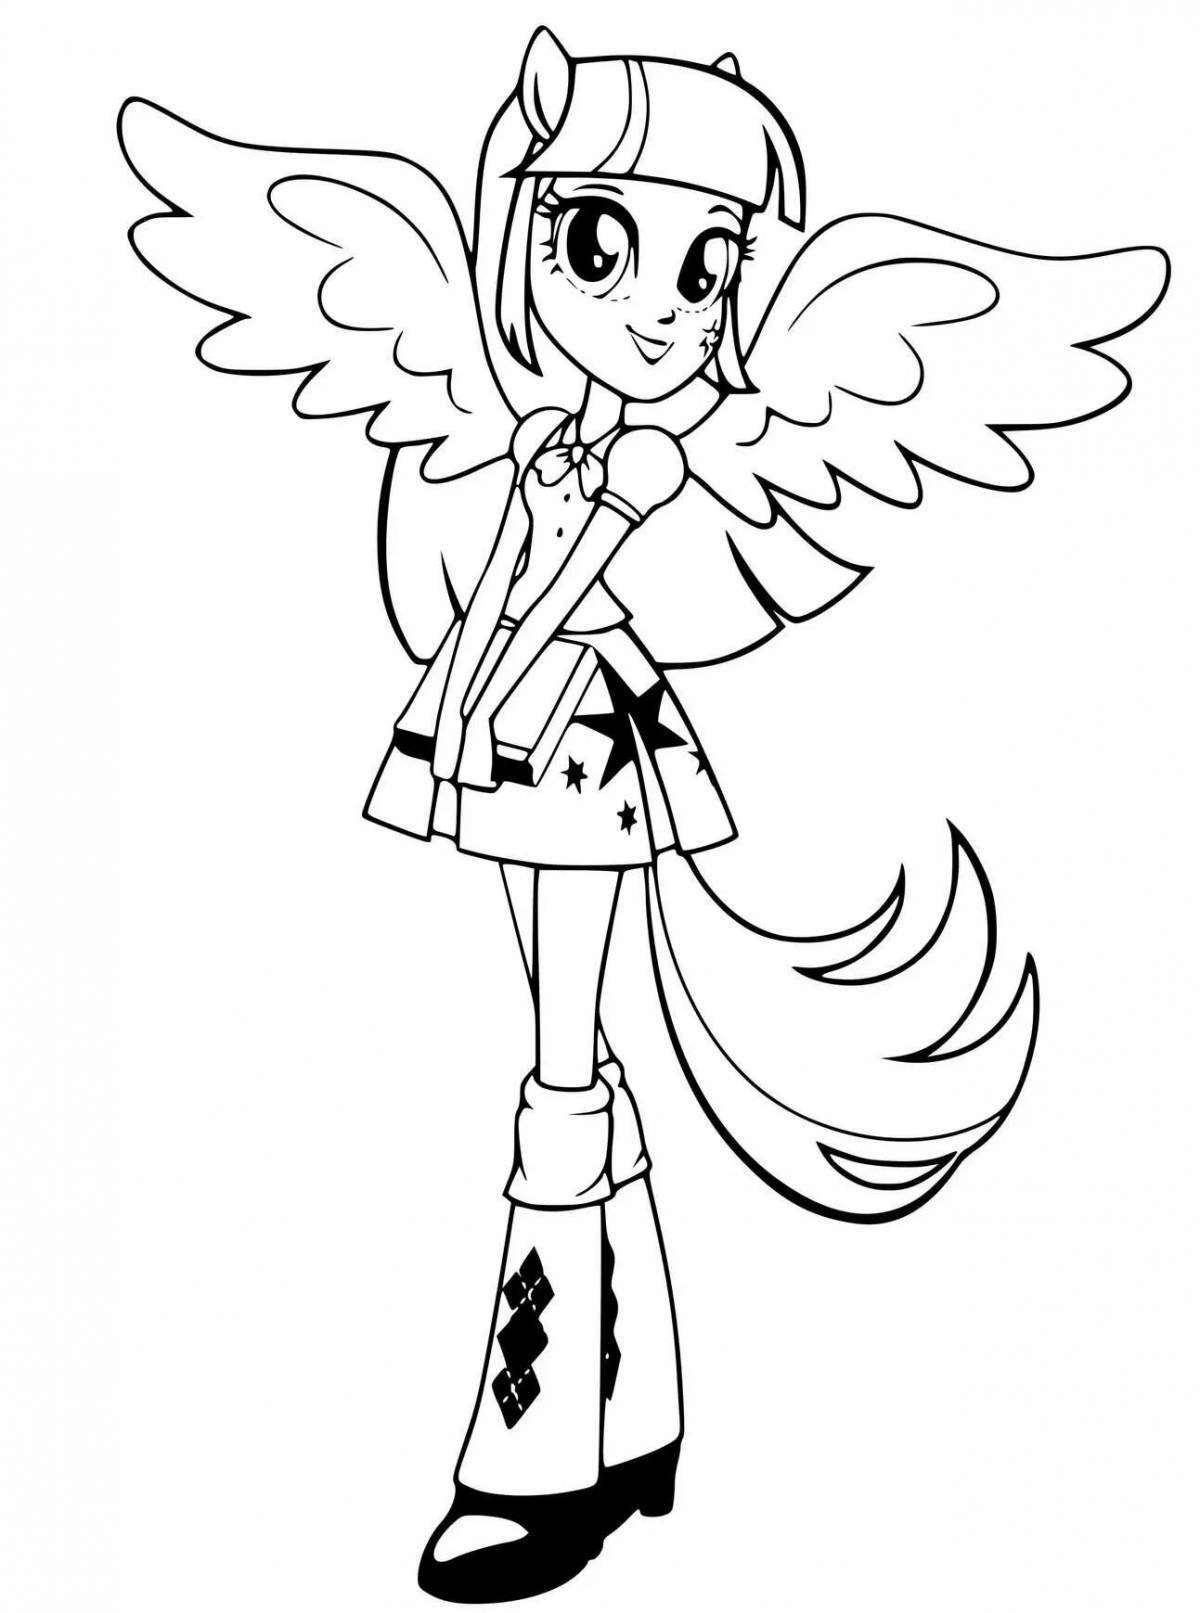 Colorful equestria girl sparkle coloring page